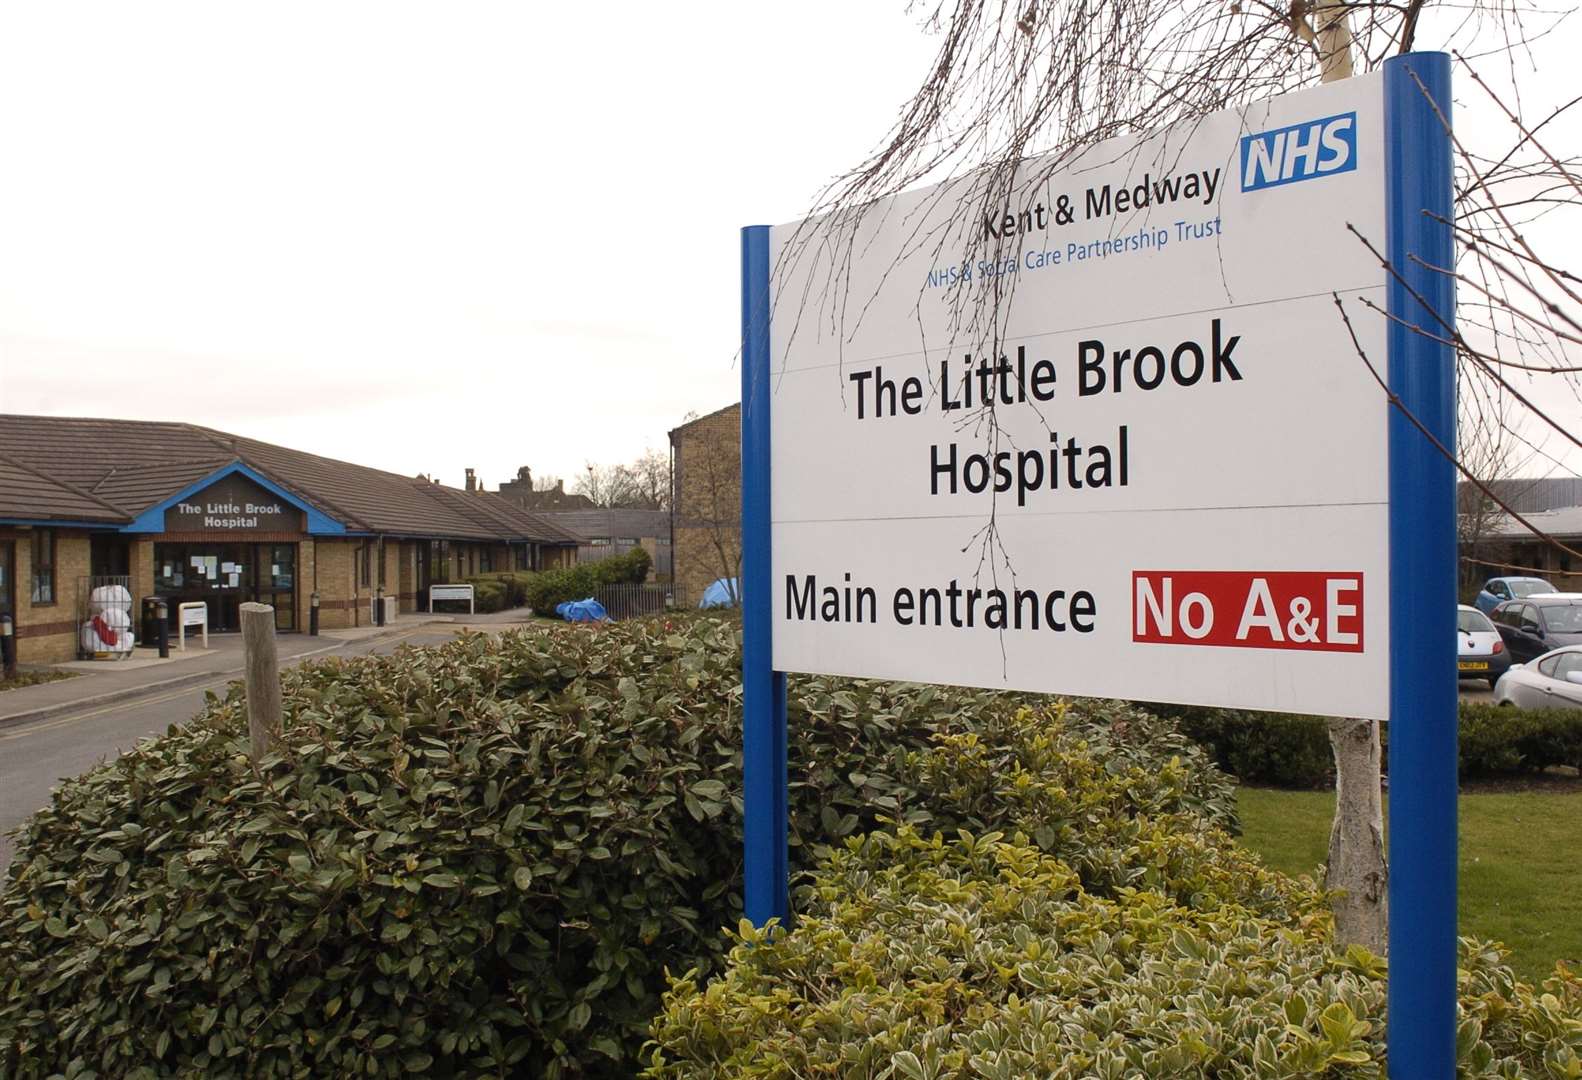 Inspectors visited the Littlebrook Hospital in Dartford after concerns were raised over the cleanliness of wards. Picture: Steve Crispe.